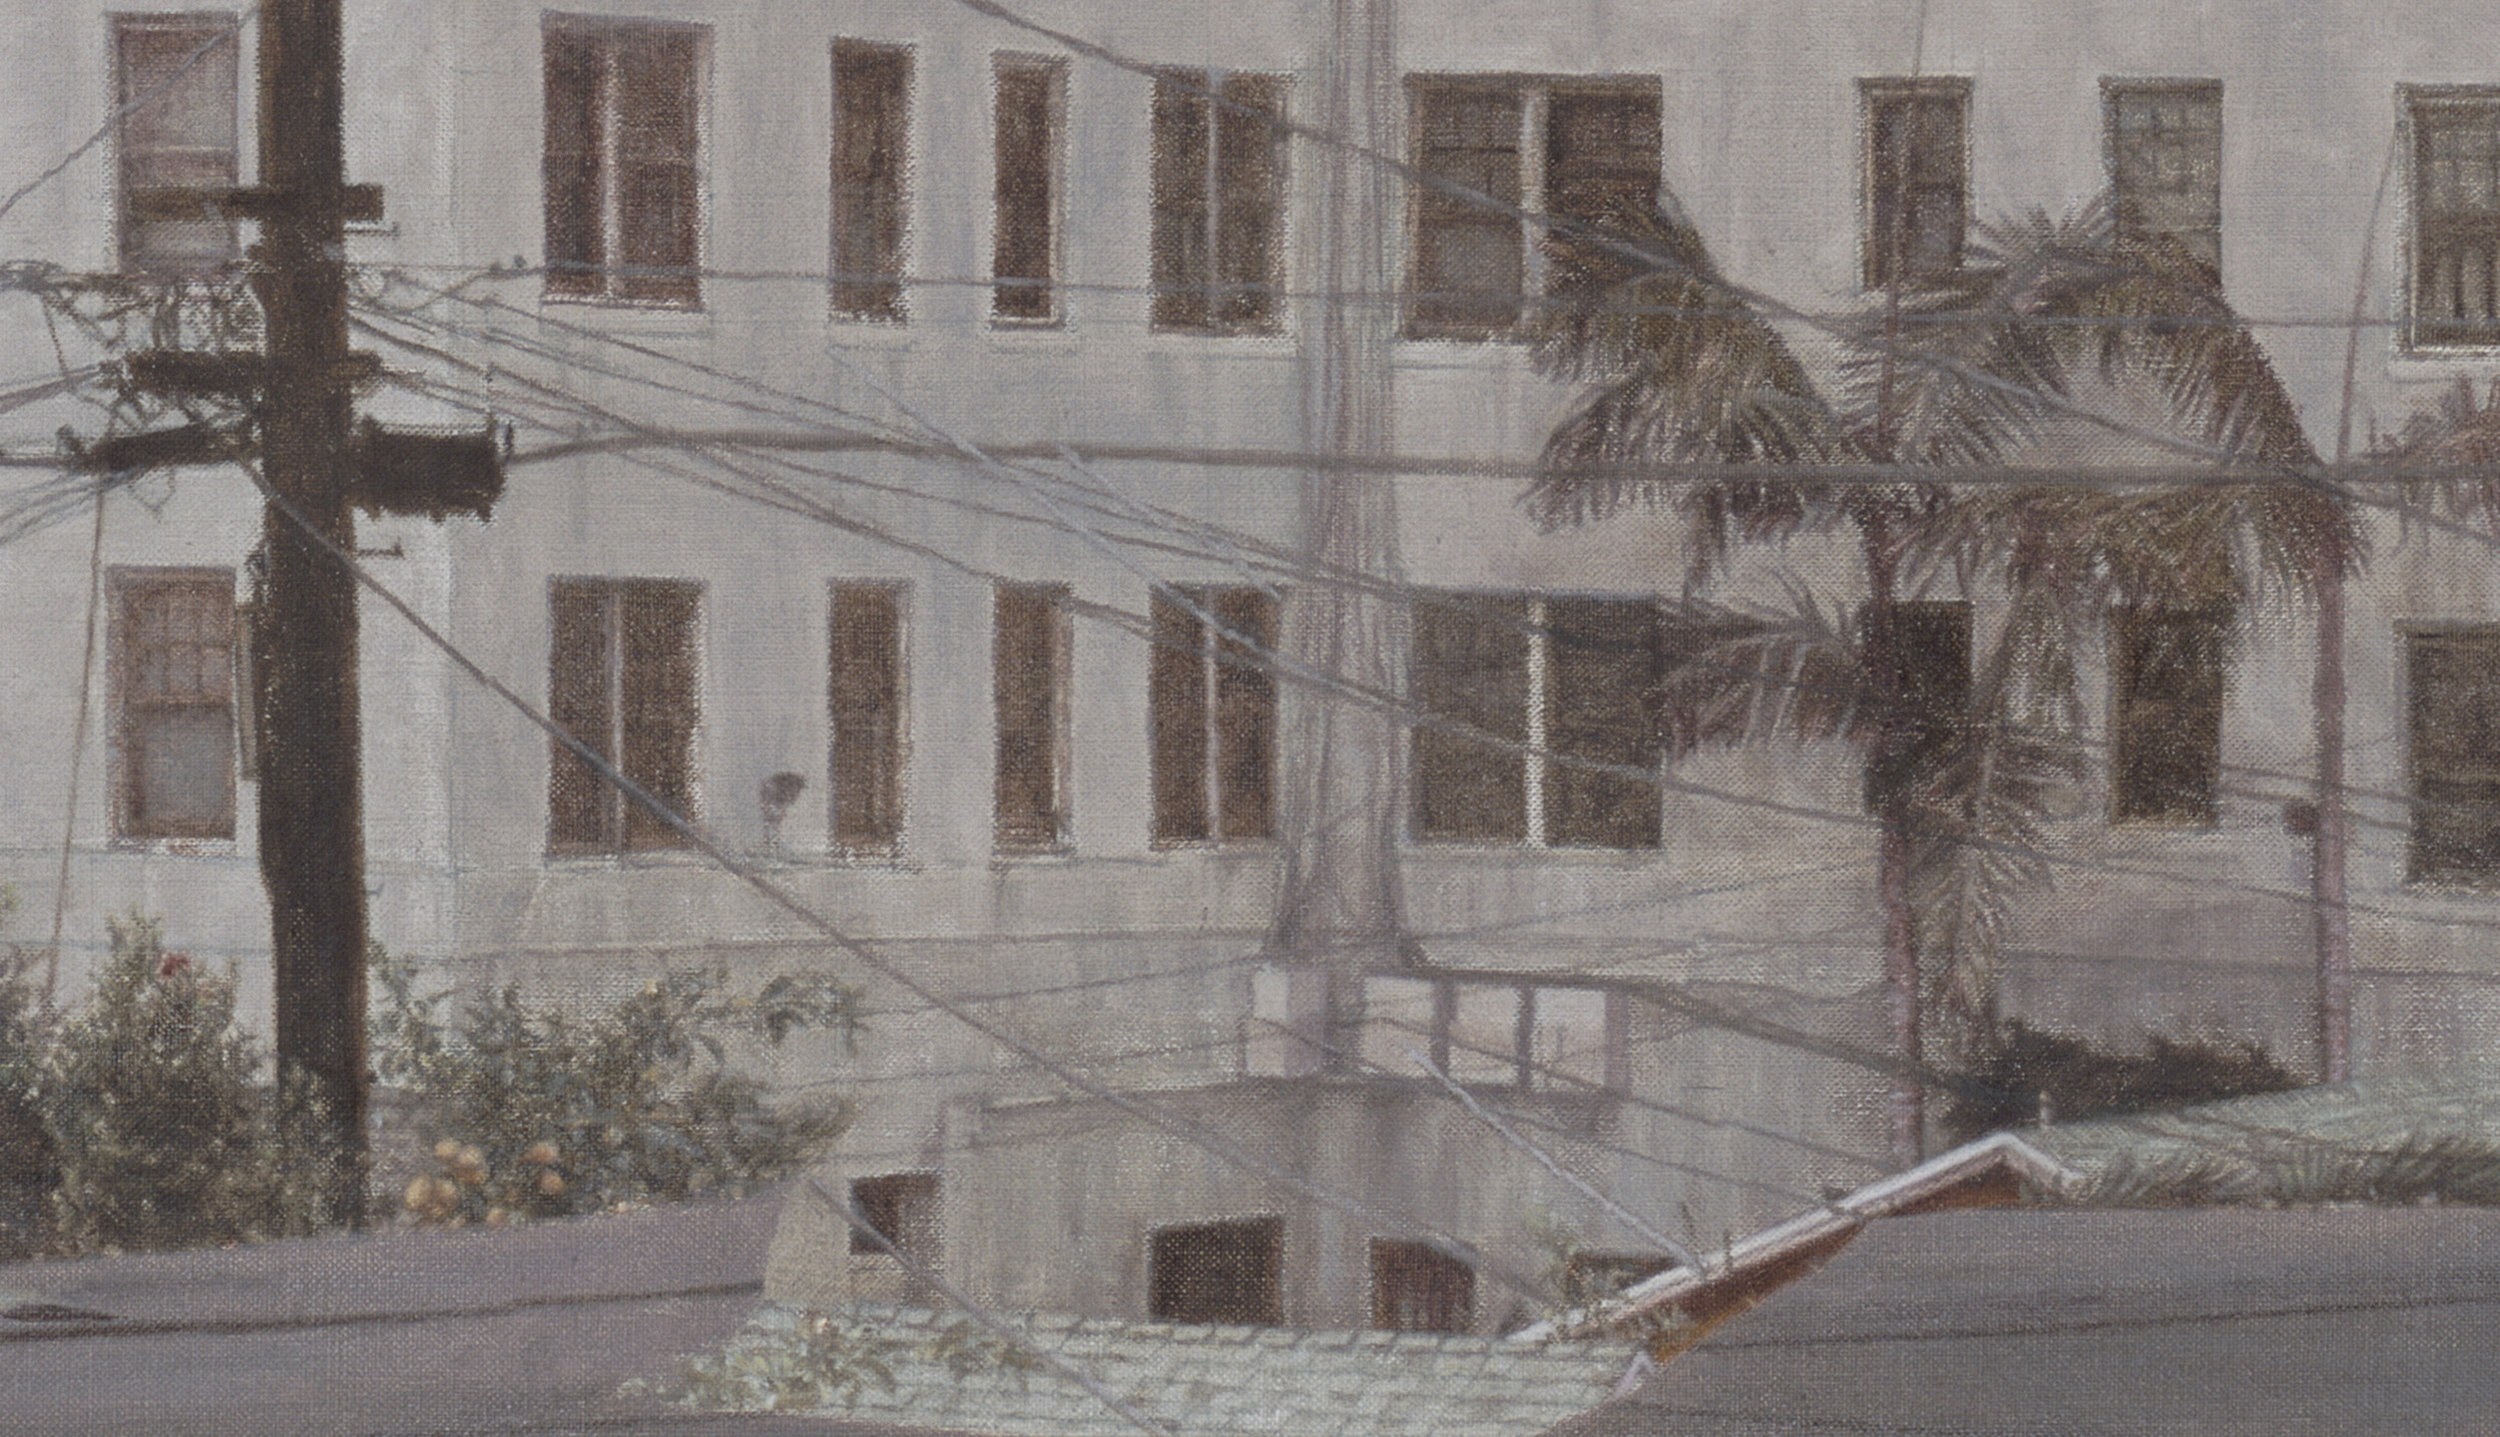   Wilshire Center Building  (Detail), 2015 Oil on linen 40 x 70 inches   